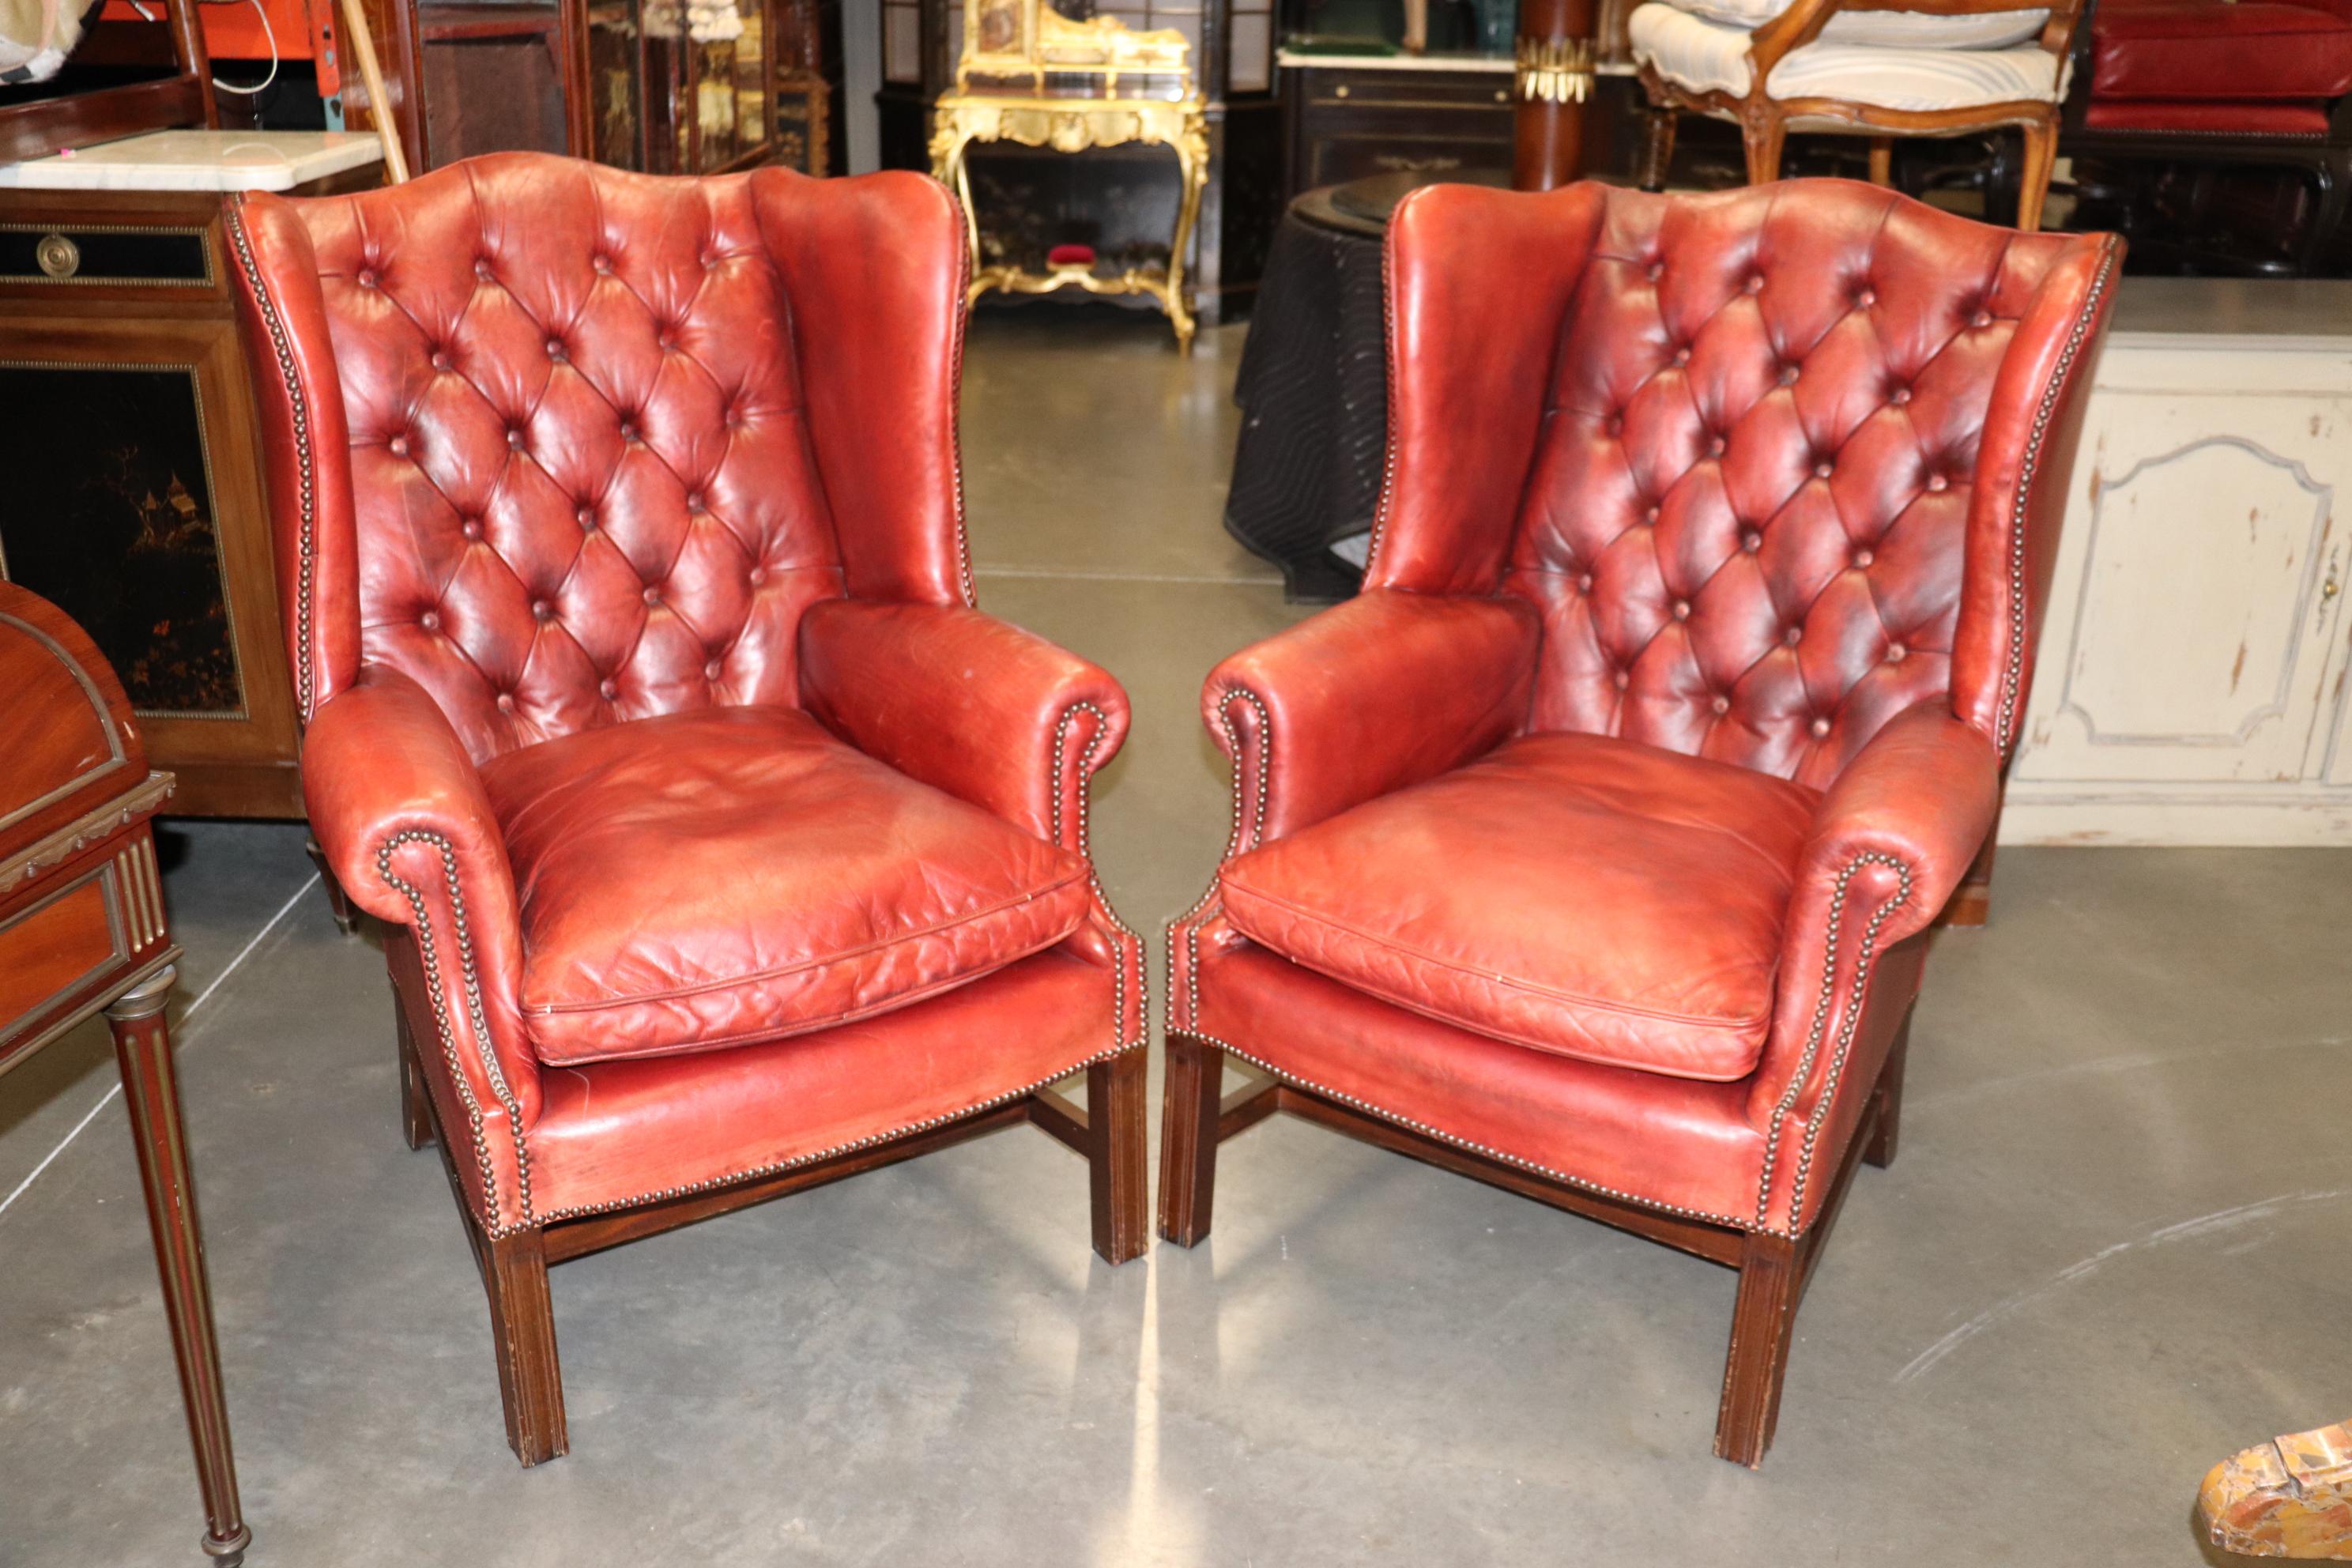 This is a gorgeous pair of antique 1920s era aged leather chairs in a gorgeous faded red with so much character and distressing that they have that 